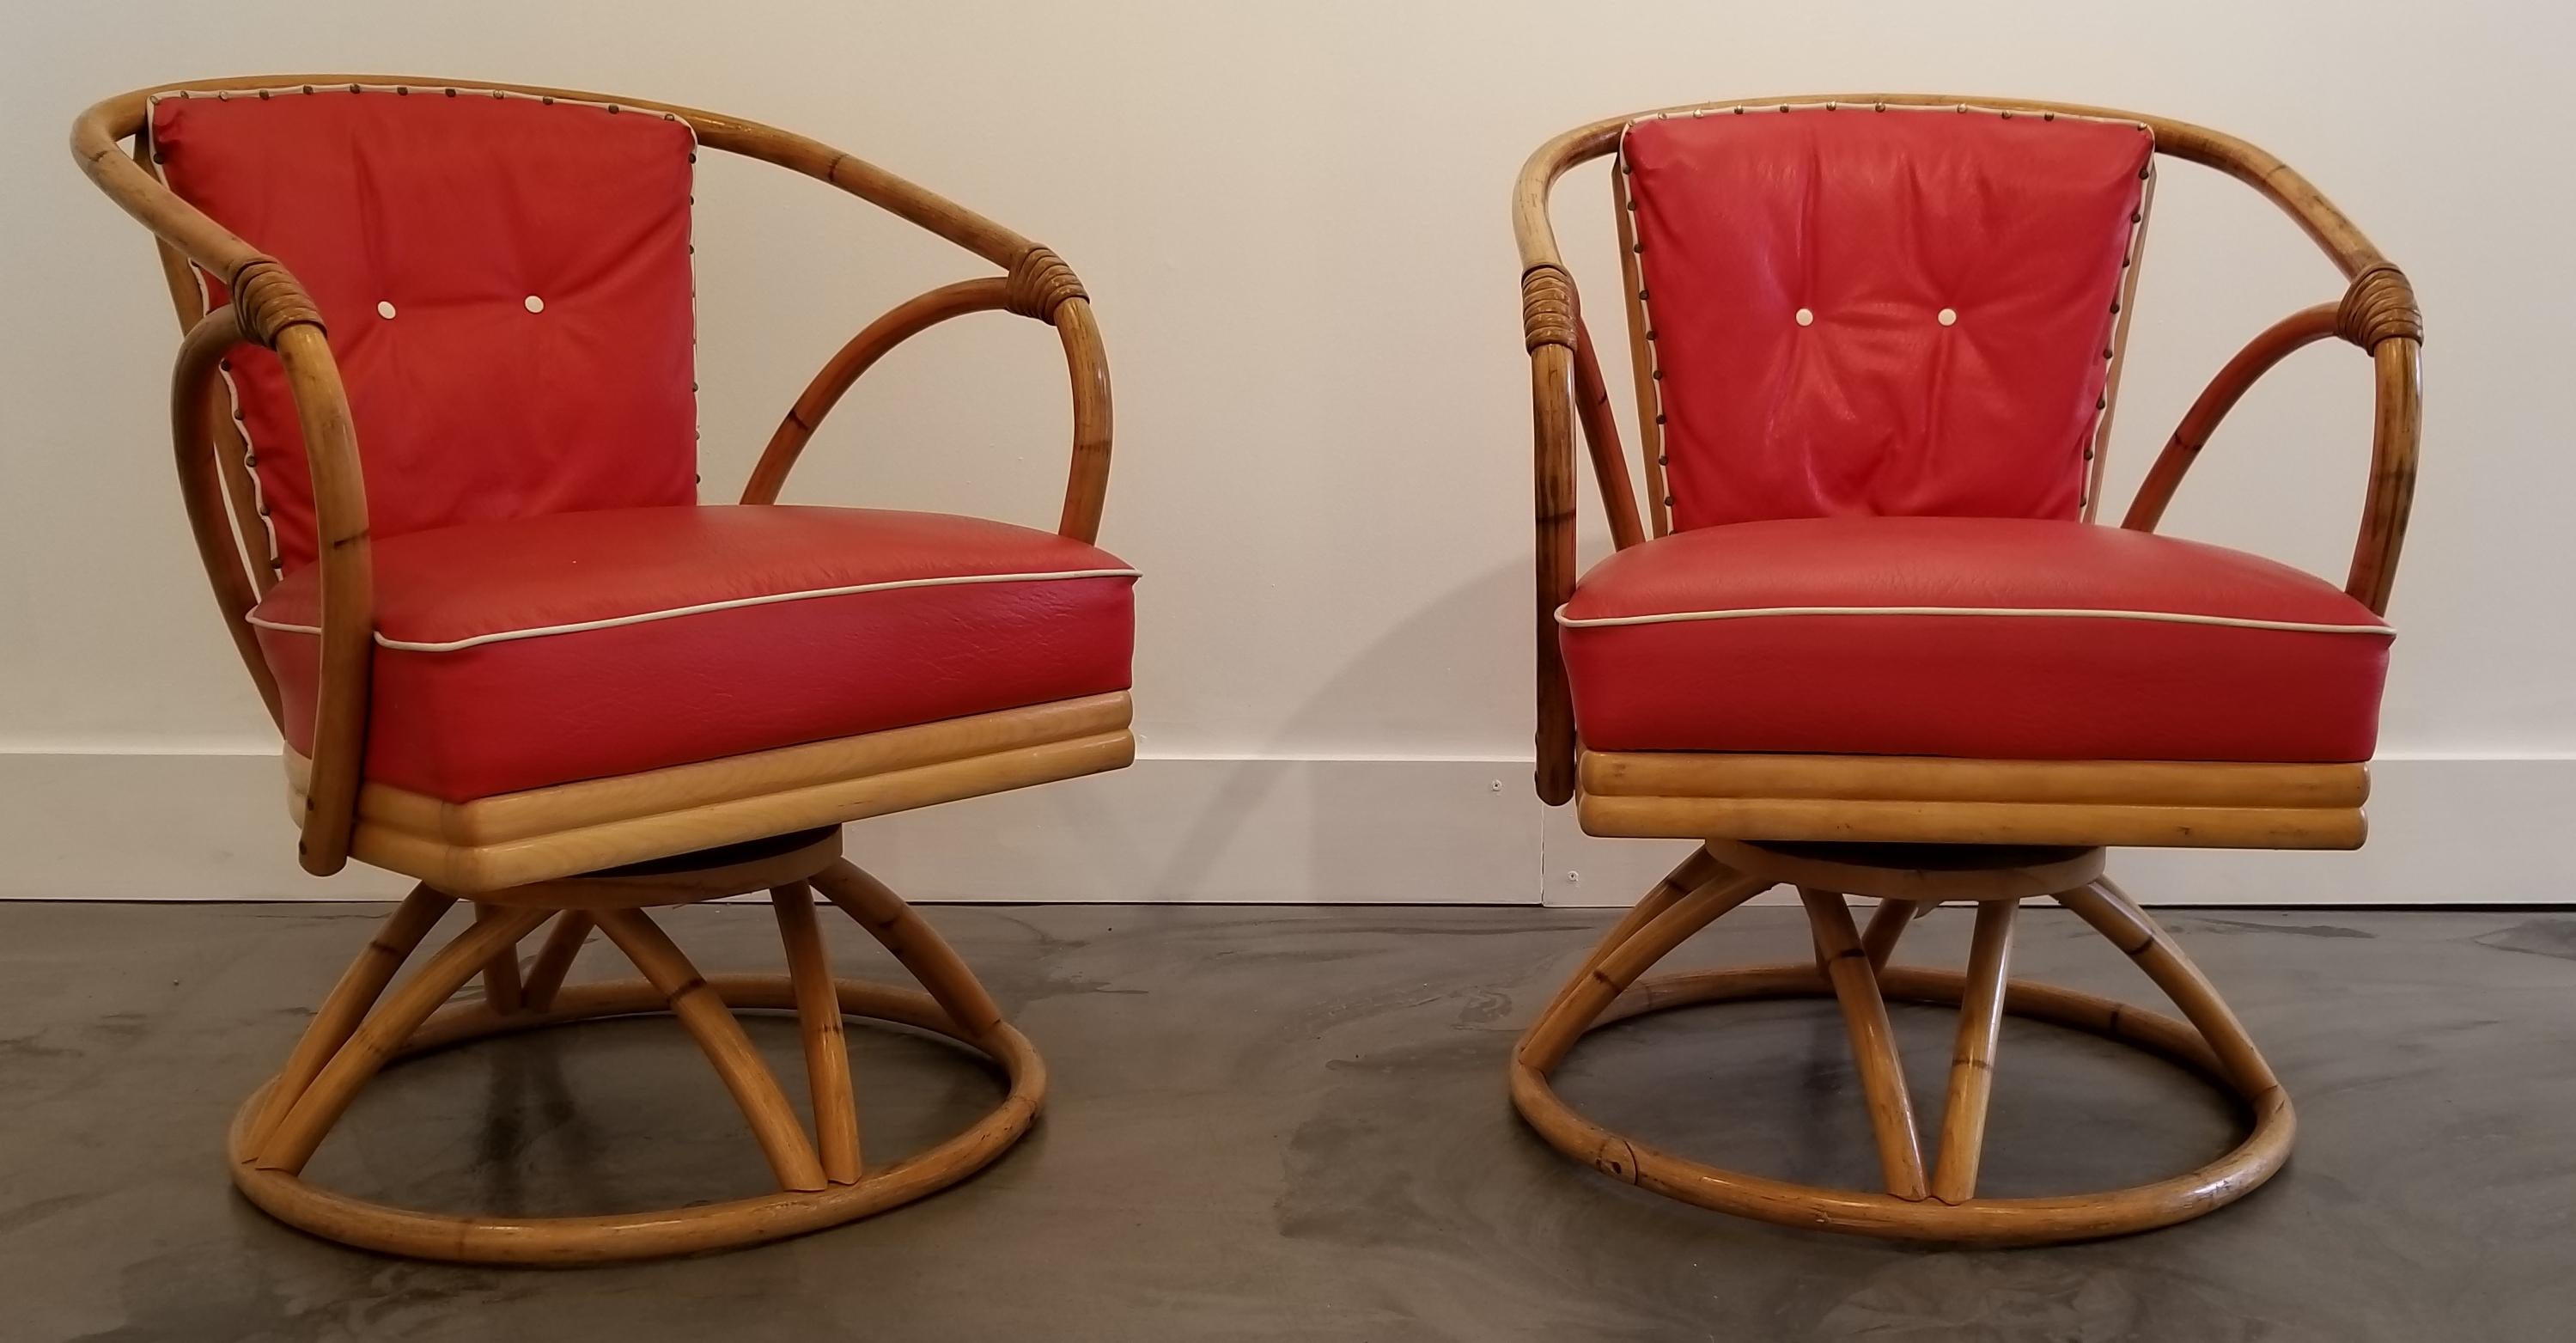 A pair of swivel lounge chairs made of steamed oak and rattan. Very good vintage condition with original red vinyl upholstery. Structurally very solid, swivel has spring return to original position. Retain Heywood-Wakefield labels, circa 1950s.